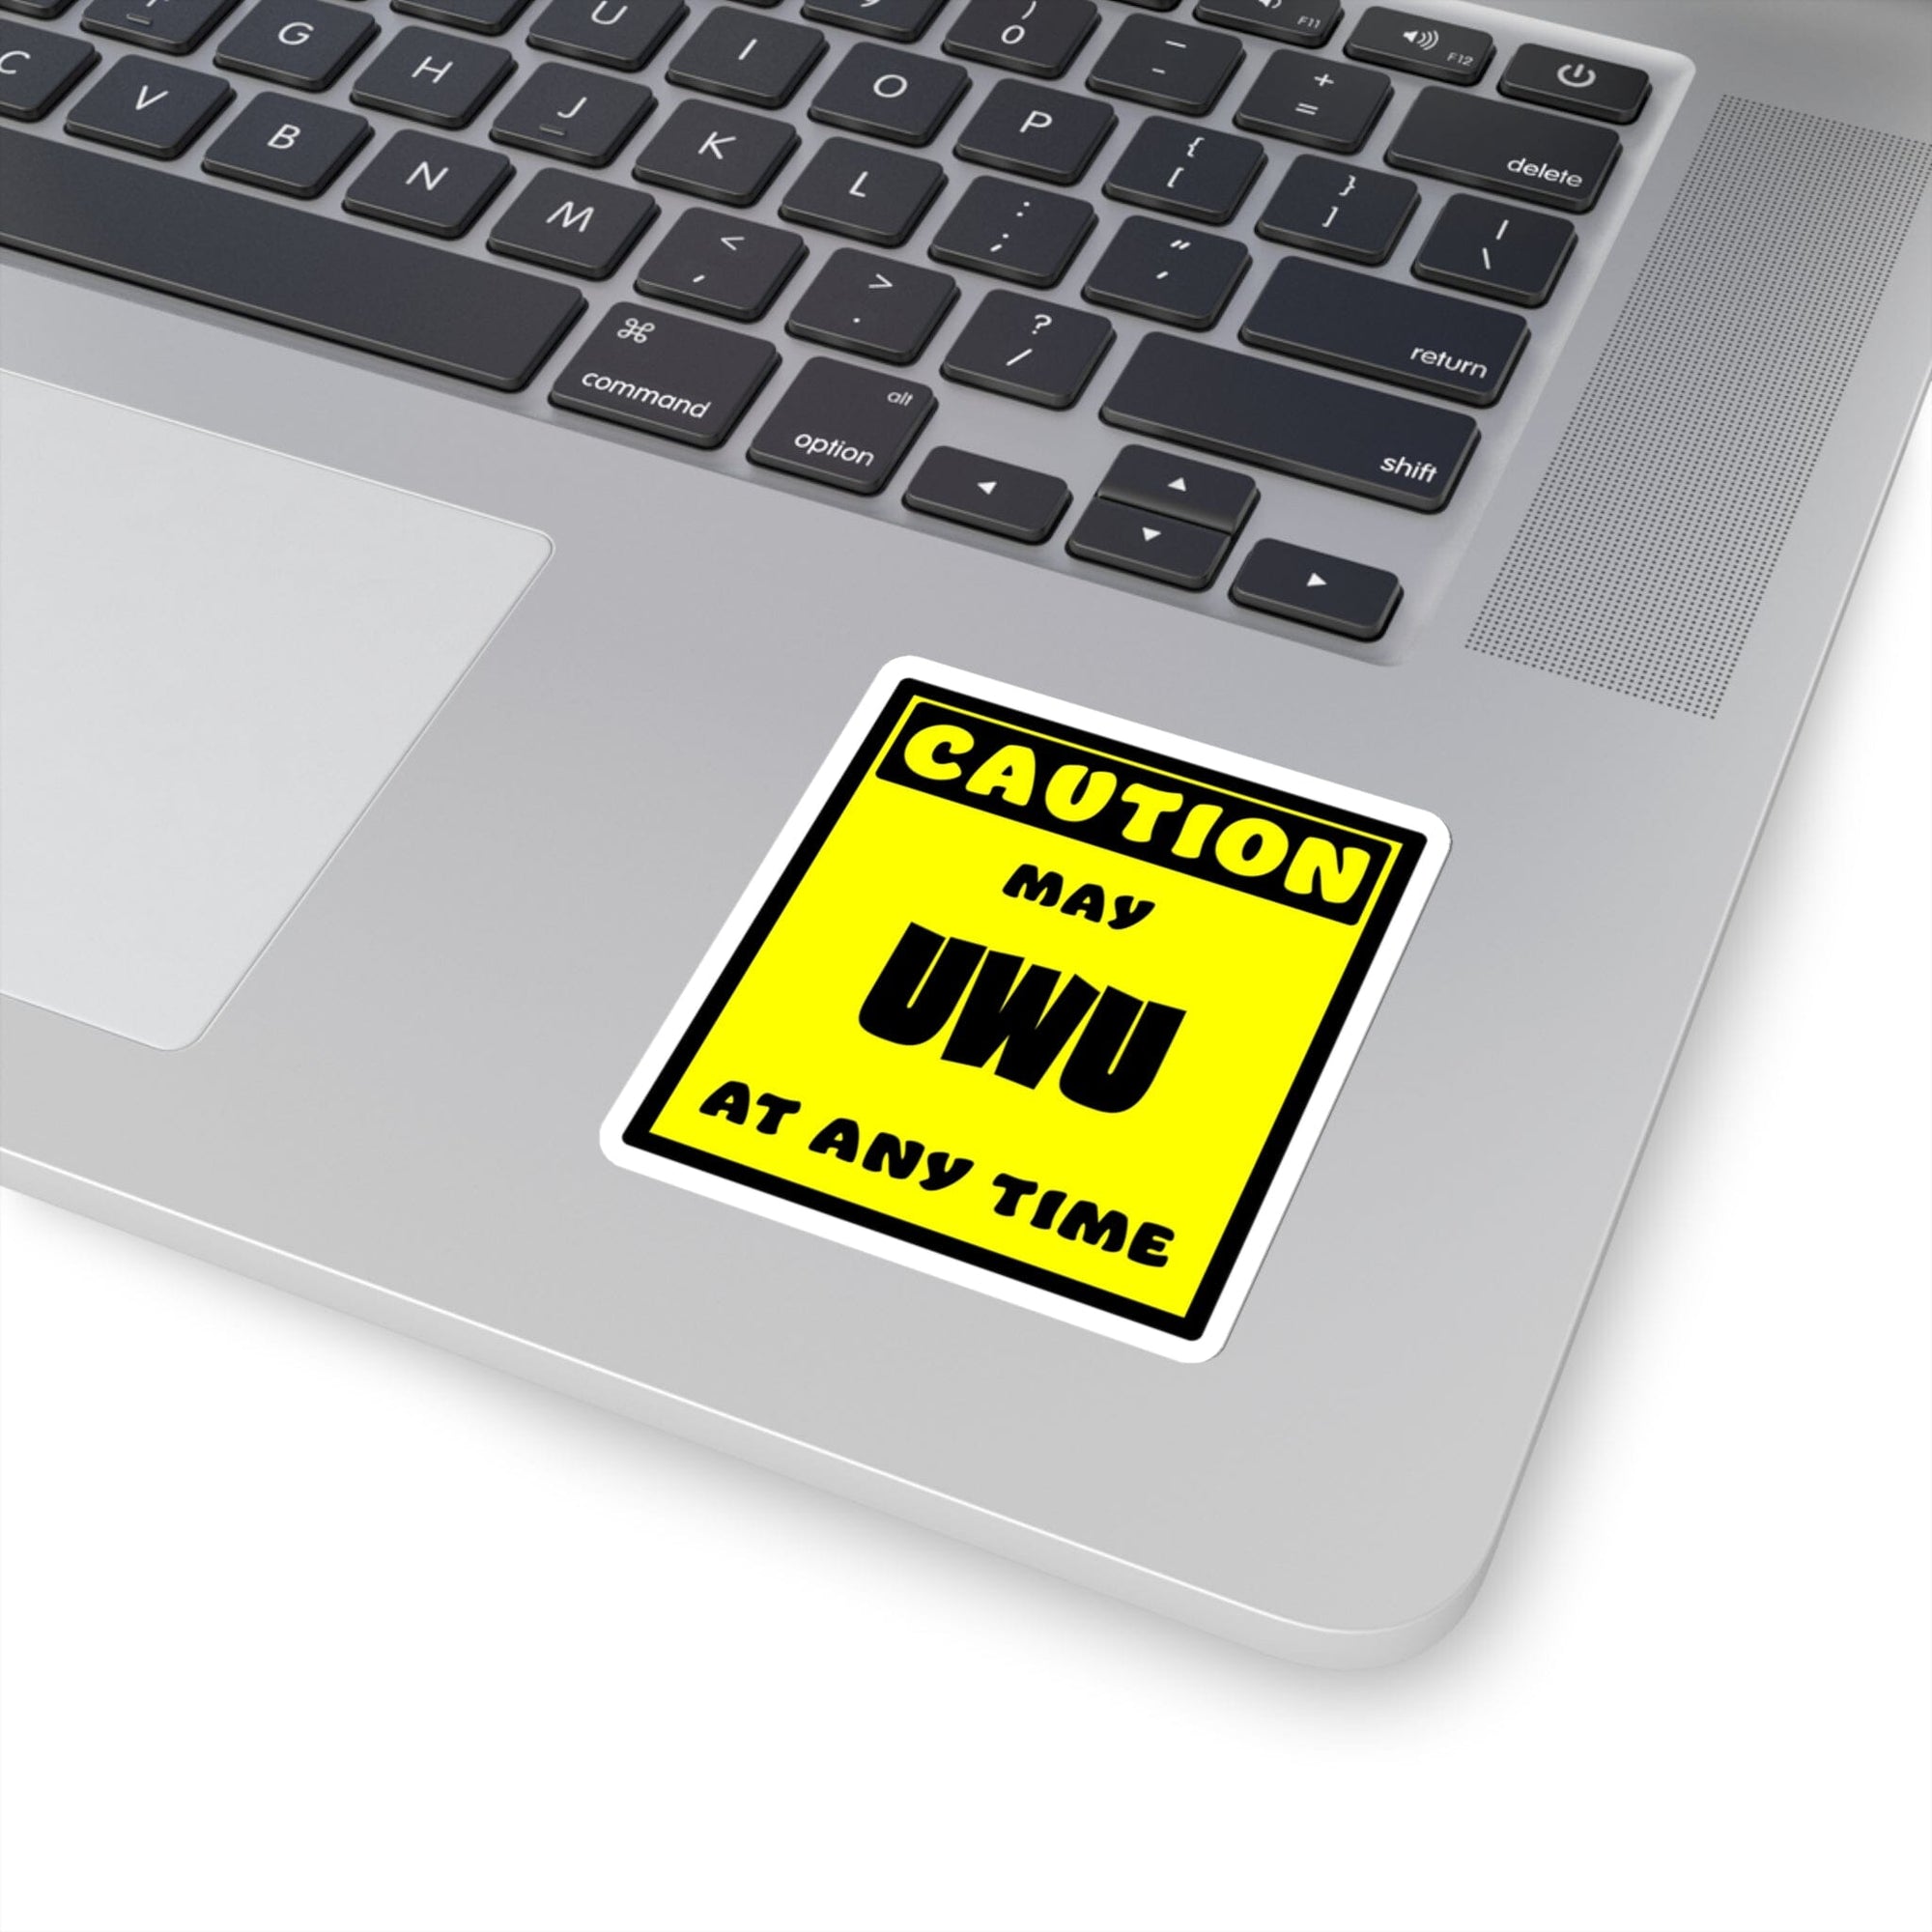 CAUTION! May UWU at any time! - Sticker Sticker AFLT-Whootorca 